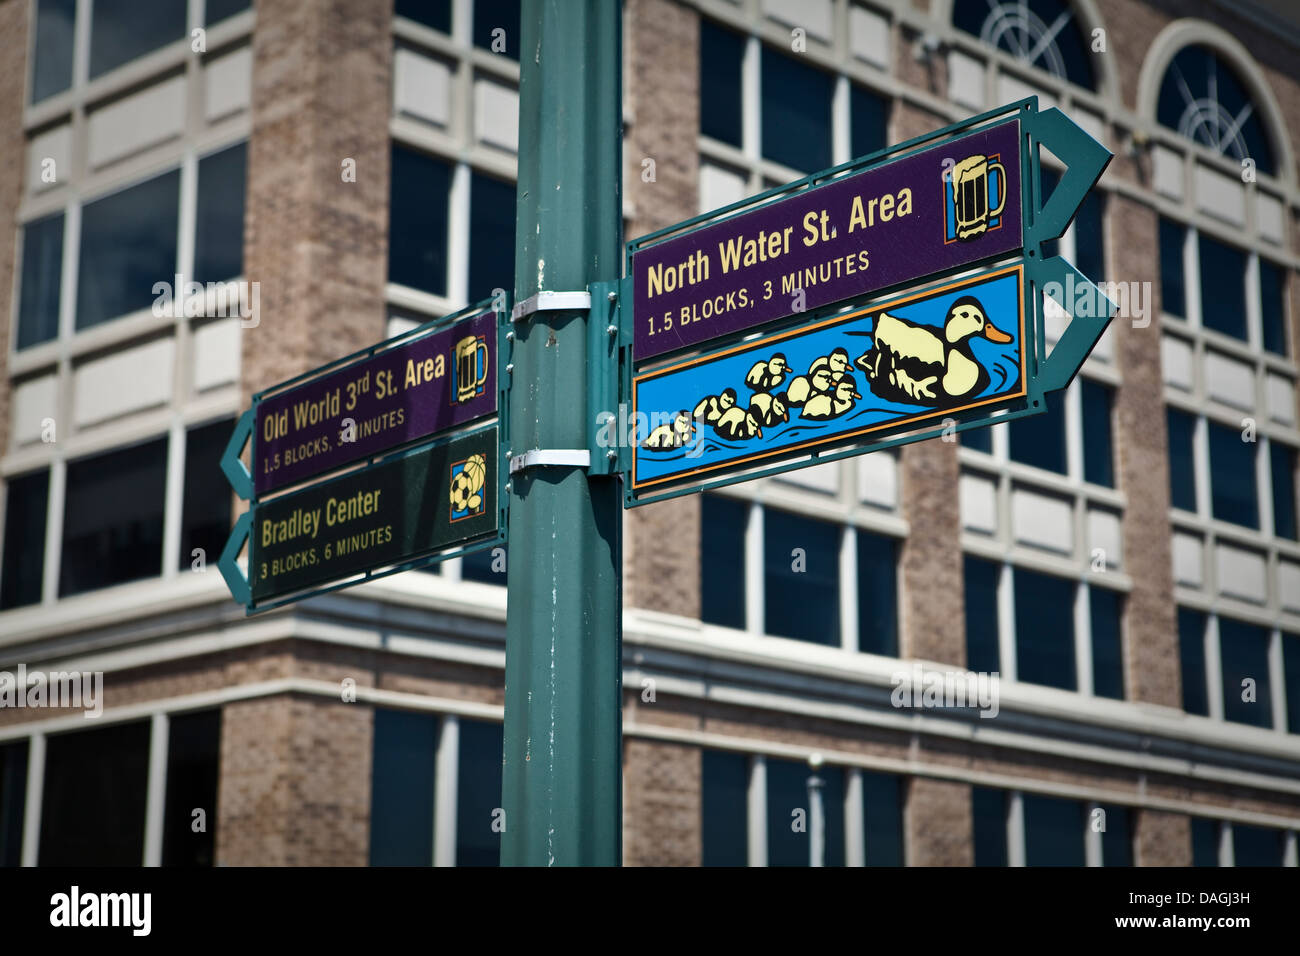 A sign pointing to Old World 3rd St. Area, Bradley Center and North Water St. Area is seen in Milwaukee Stock Photo